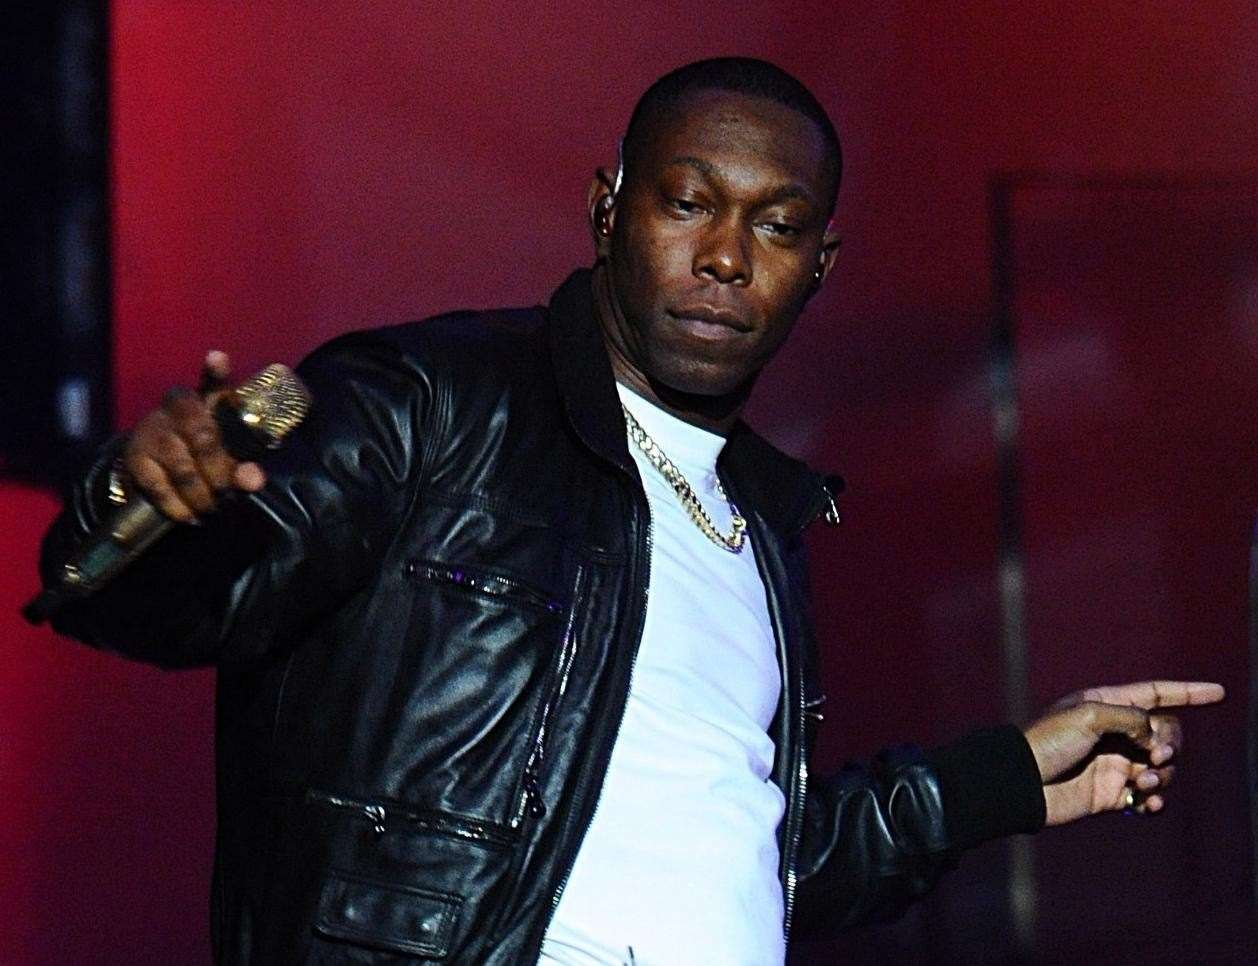 Dizzee Rascal was due to perform